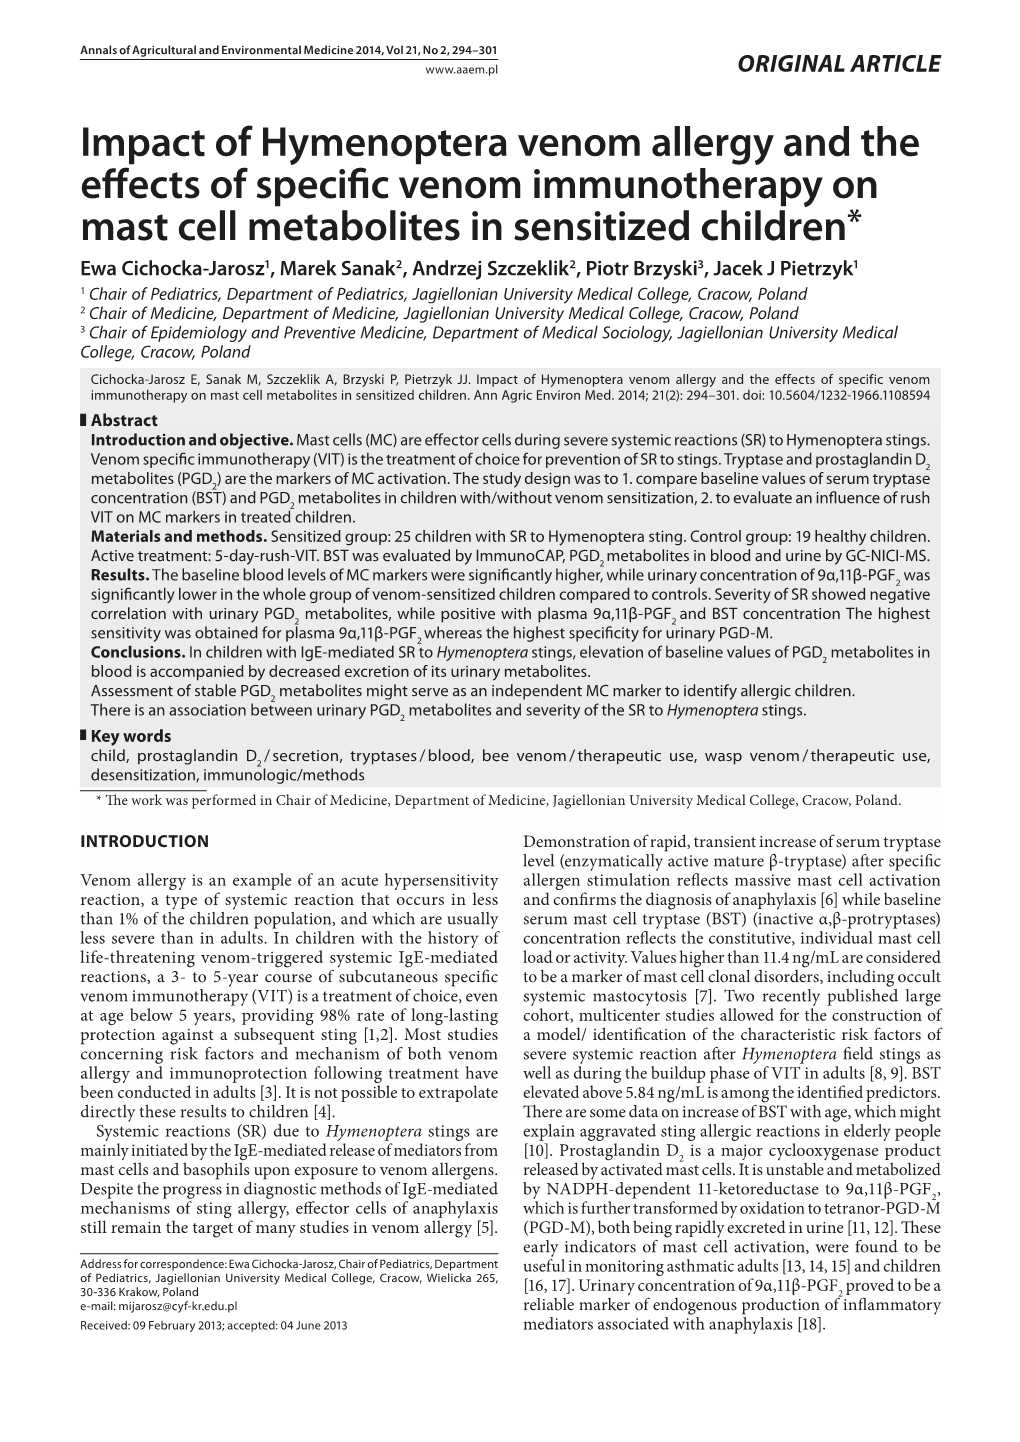 Impact of Hymenoptera Venom Allergy and the Effects of Specific Venom Immunotherapy on Mast Cell Metabolites in Sensitized Children